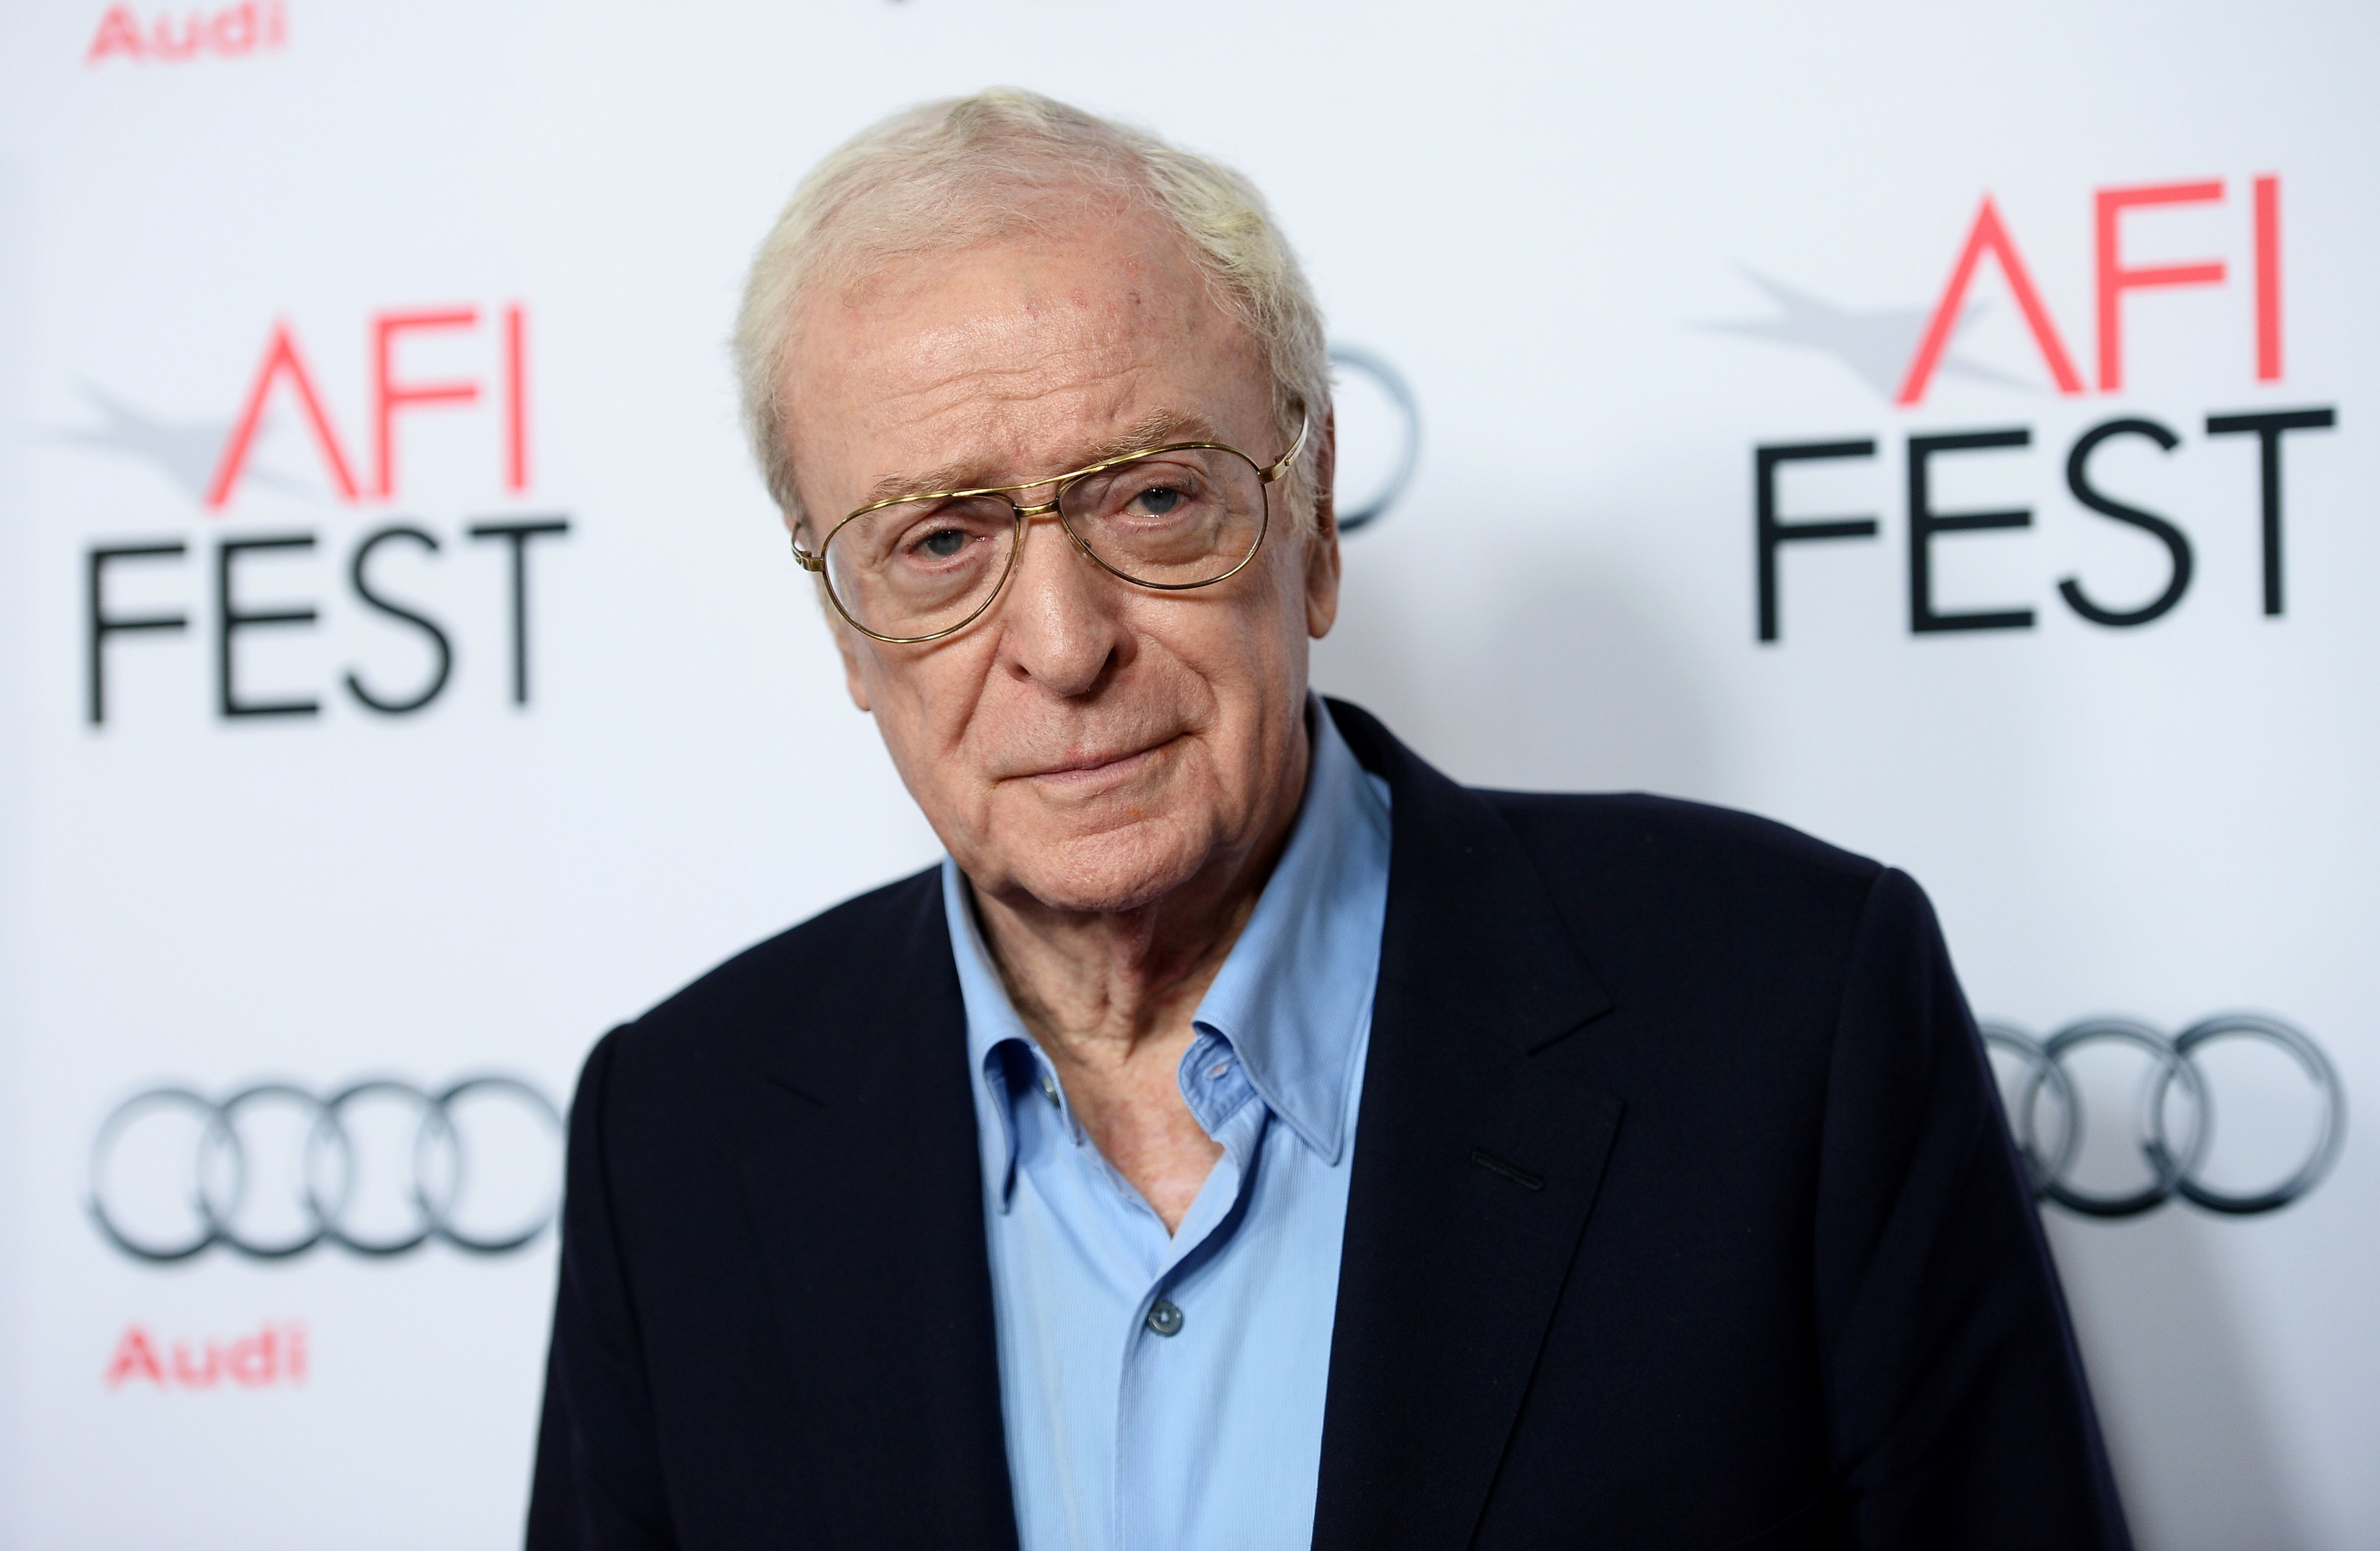 Michael Caine is selling his art and film memorabilia – and even his  glasses